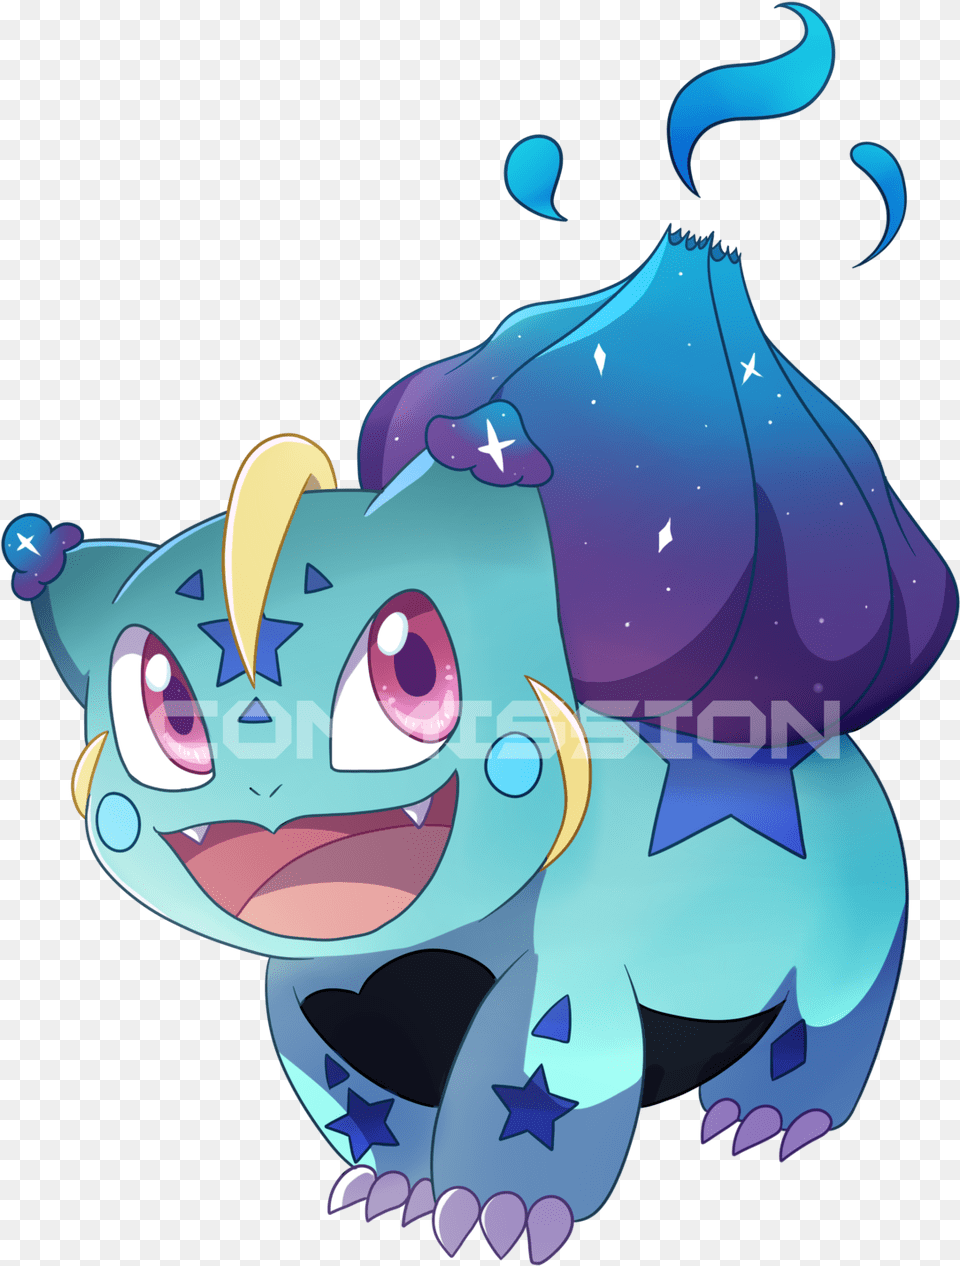 Commission Of A Bulbasaurcosmog Fusion Also Known Pokemon Cosmog Fusion, Art, Graphics, Baby, Person Free Png